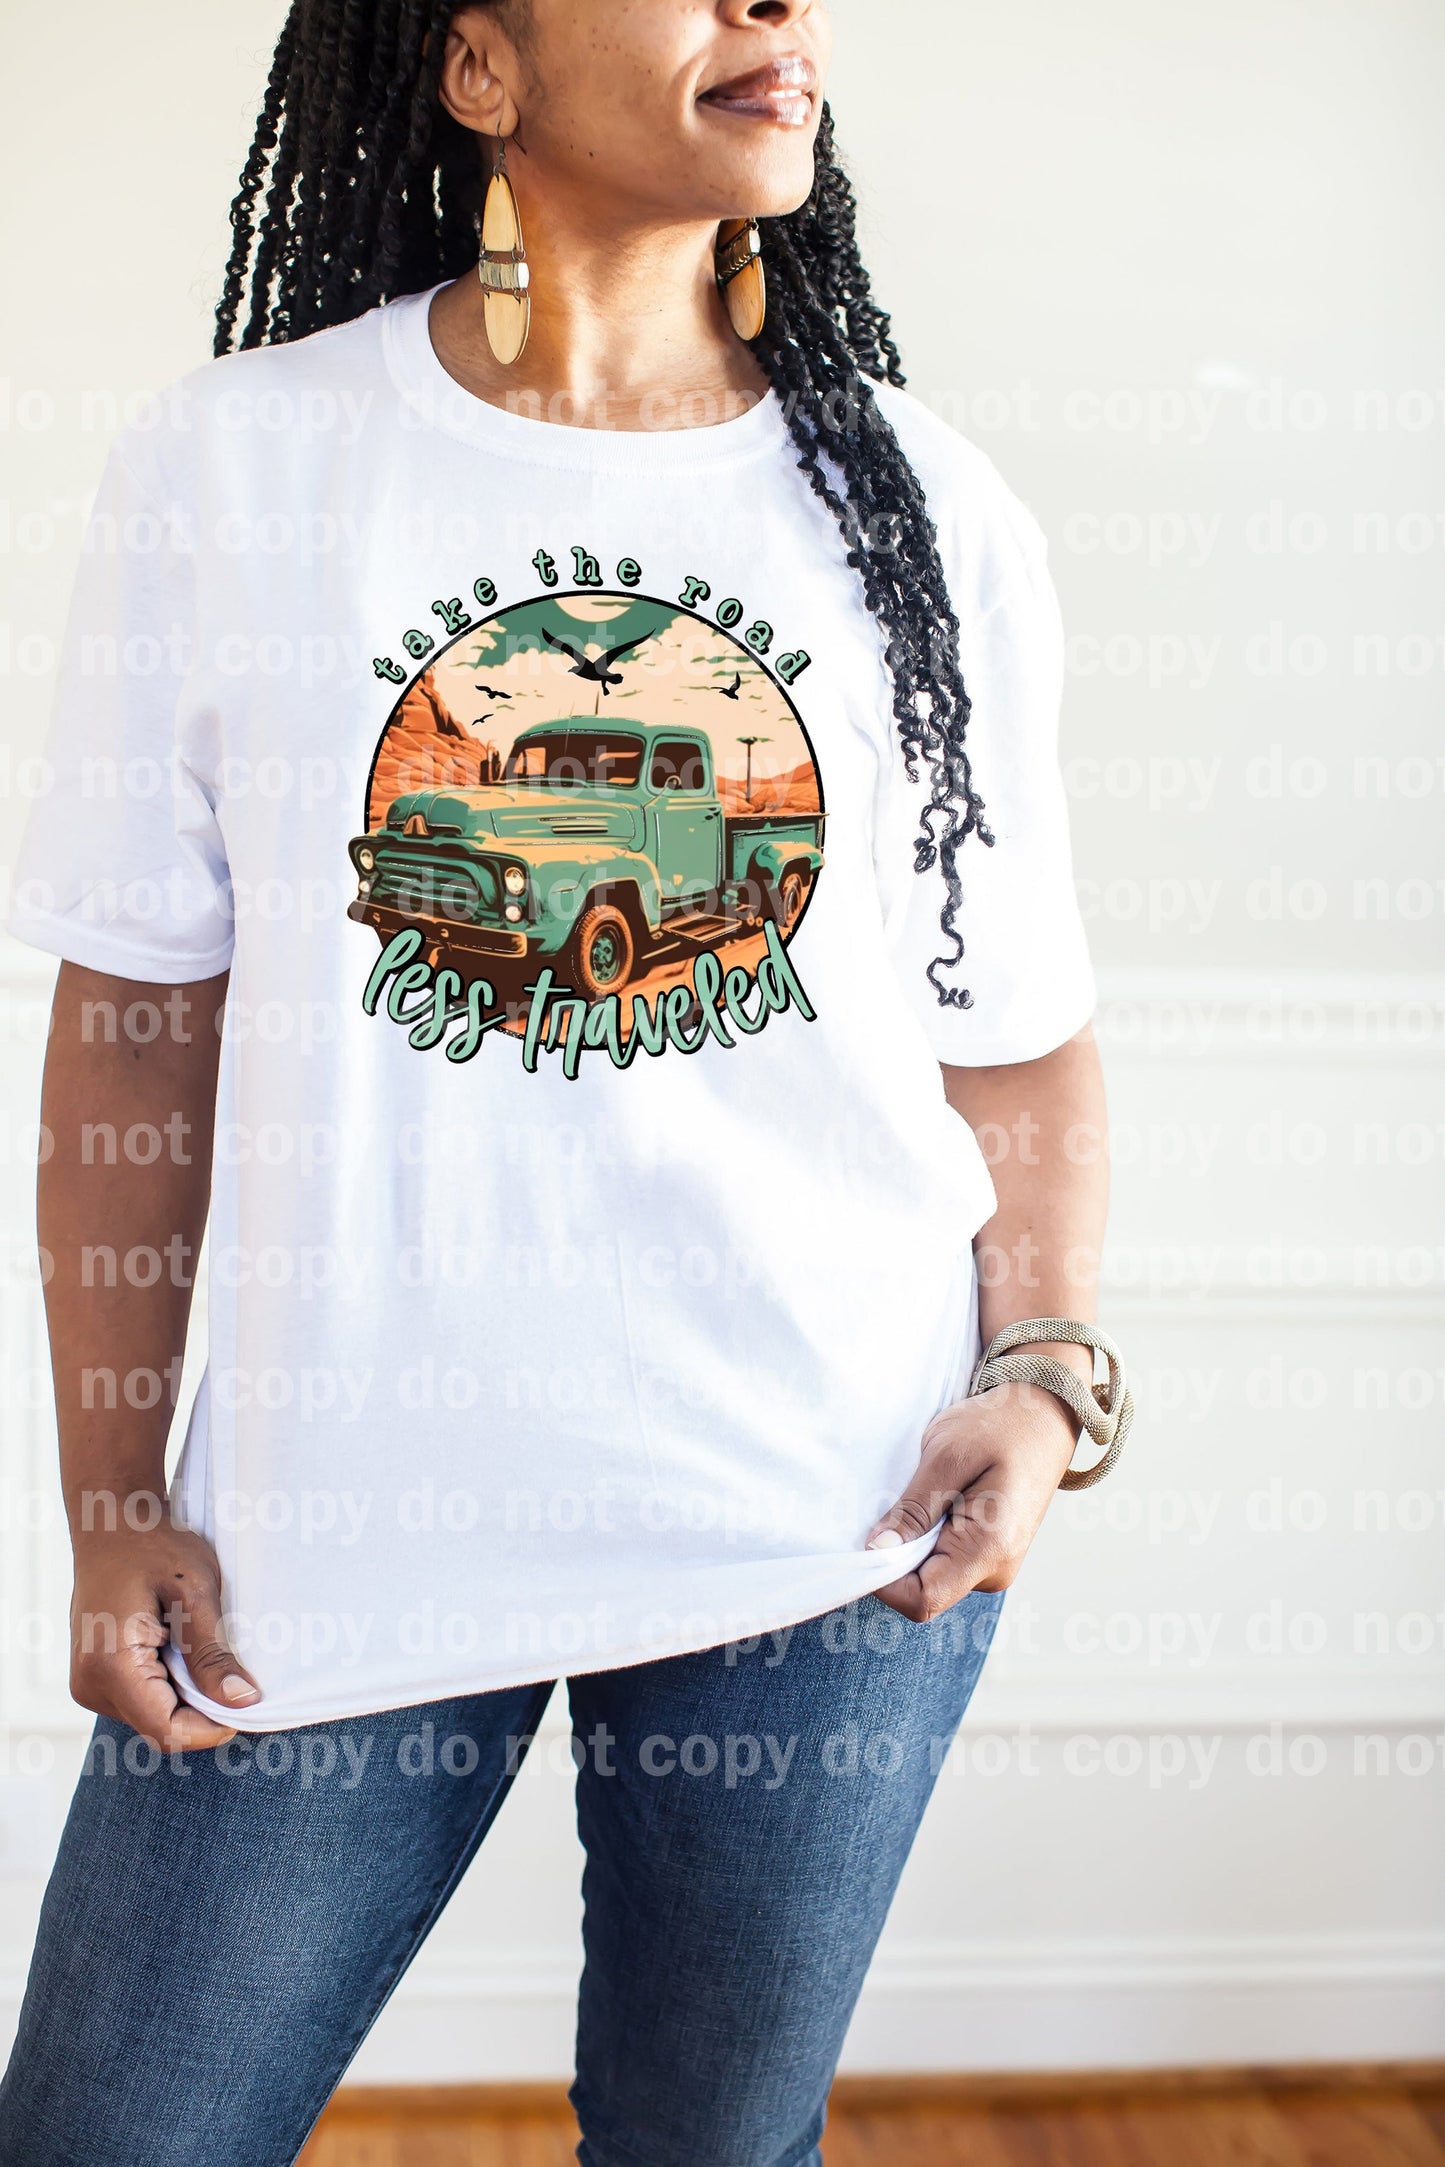 Take The Road Less Traveled Dream Print or Sublimation Print